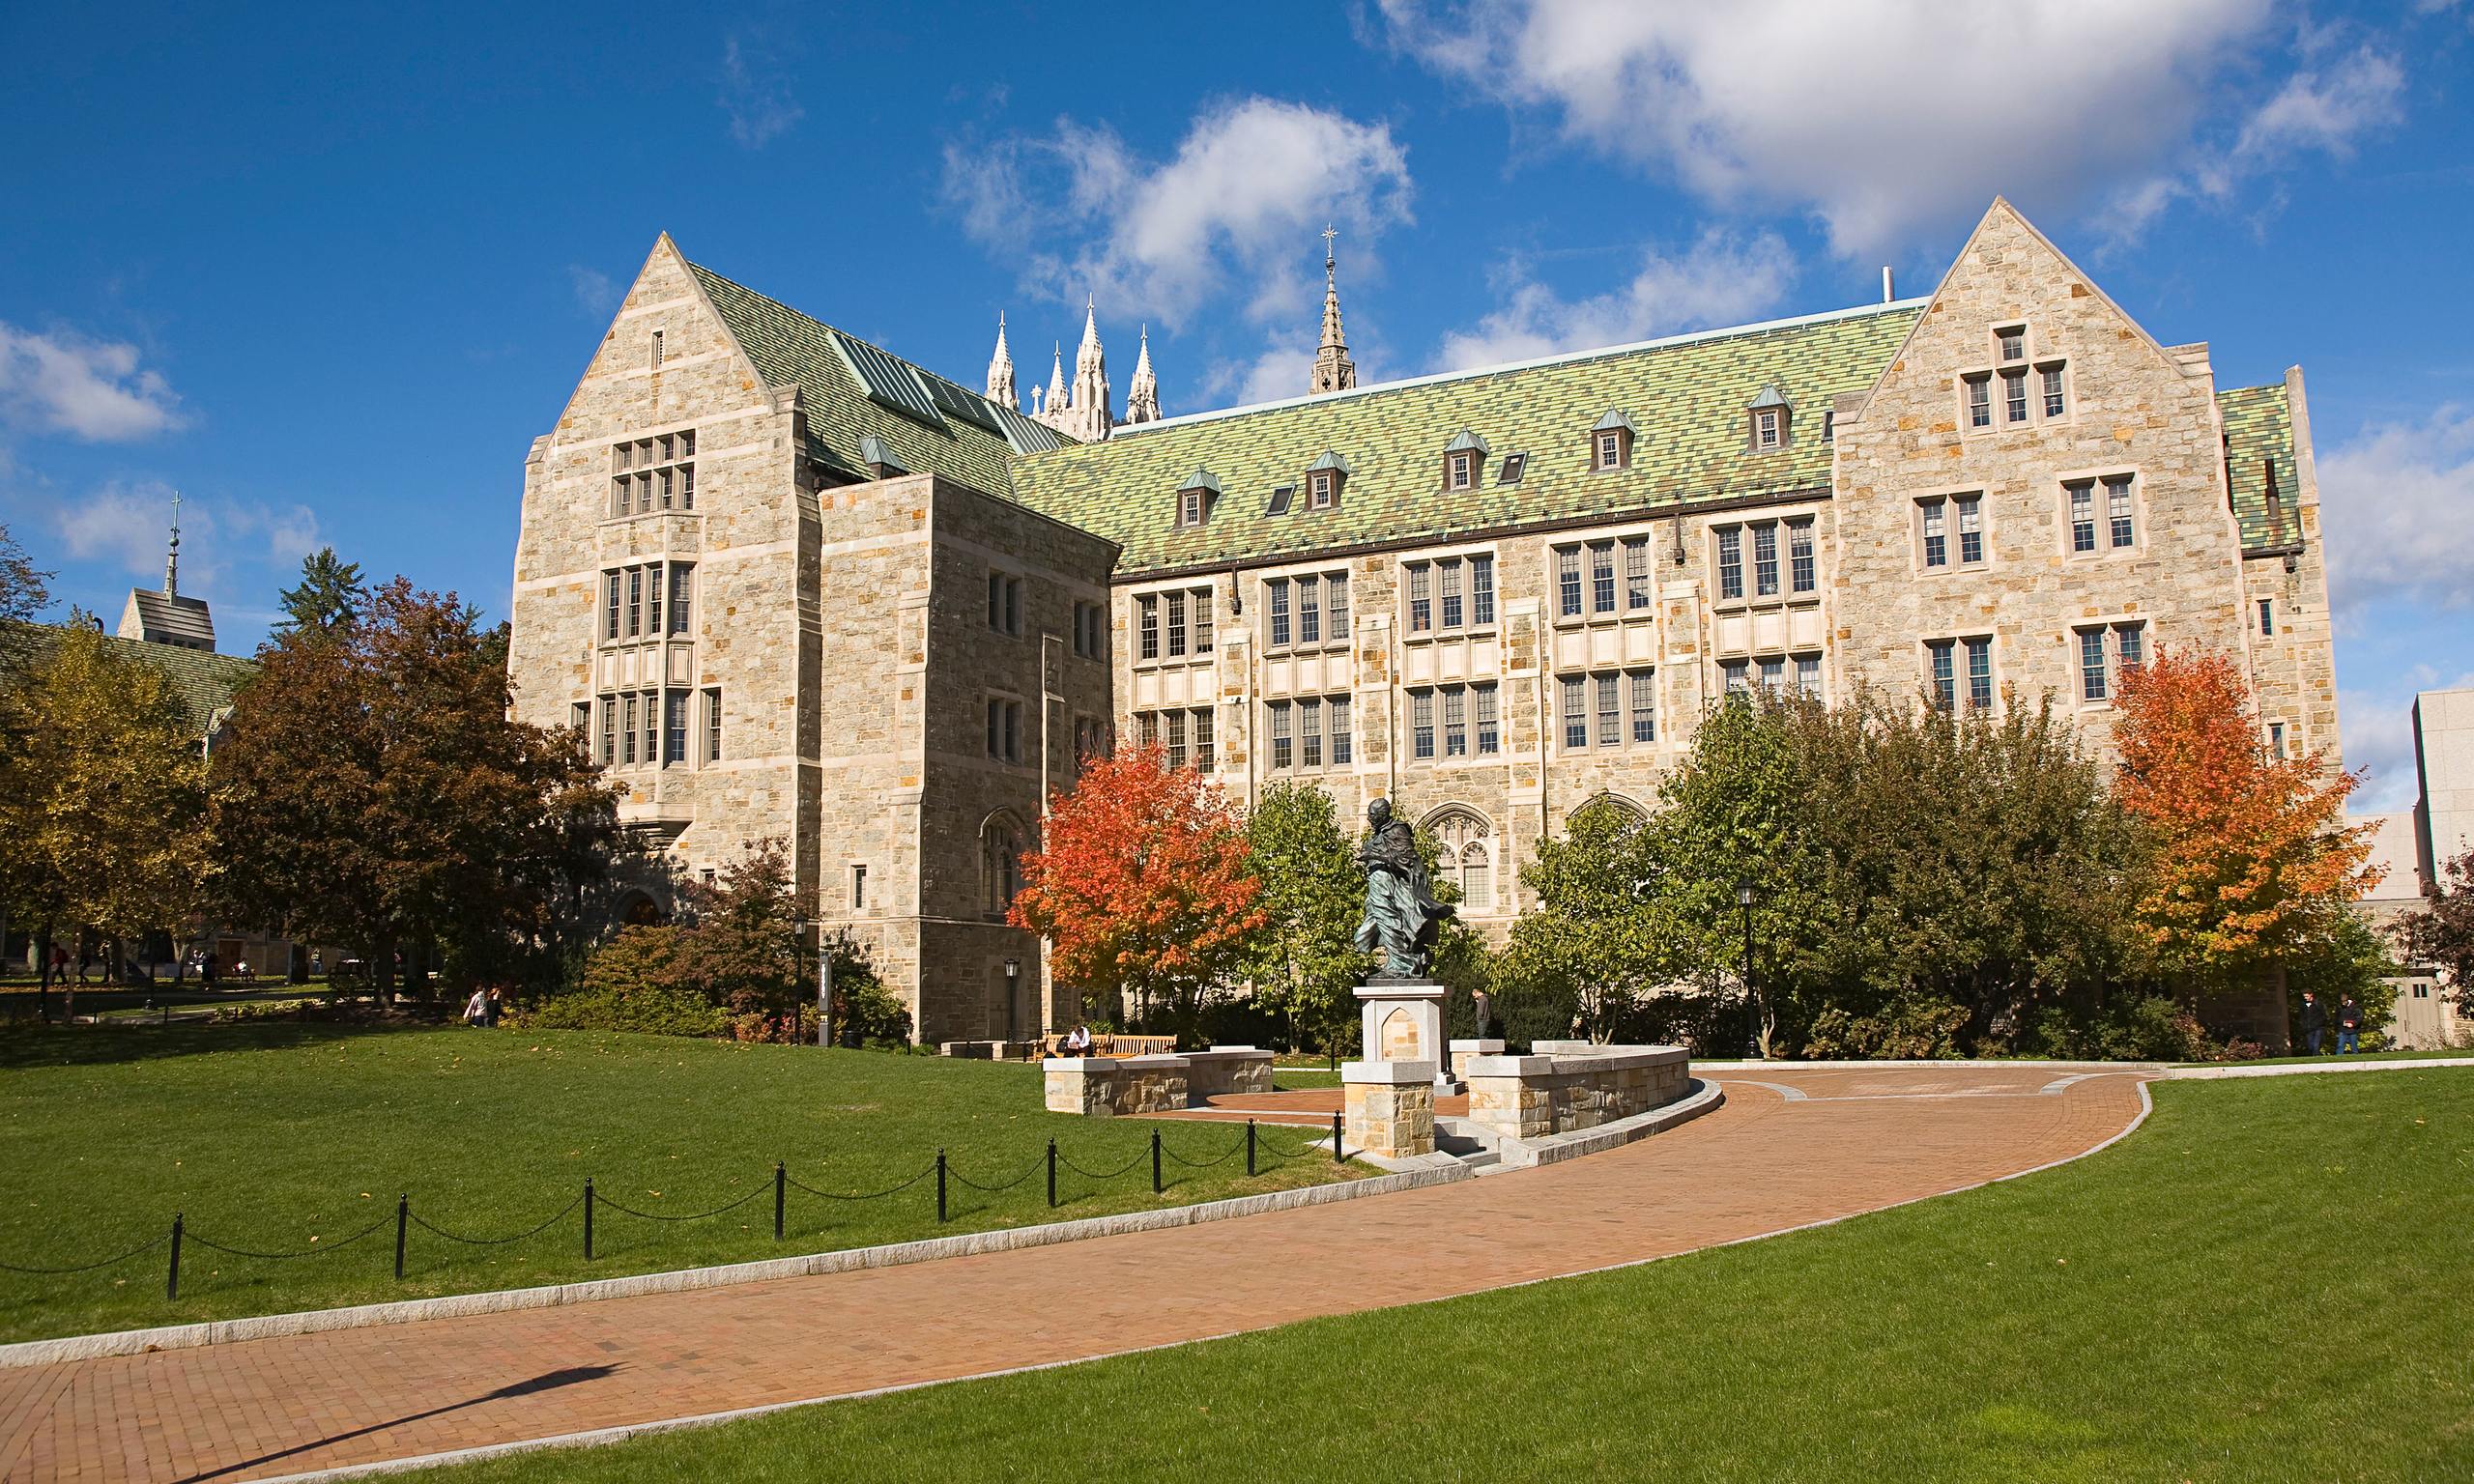 NBC News launches legal bid to obtain Boston College interview tapes